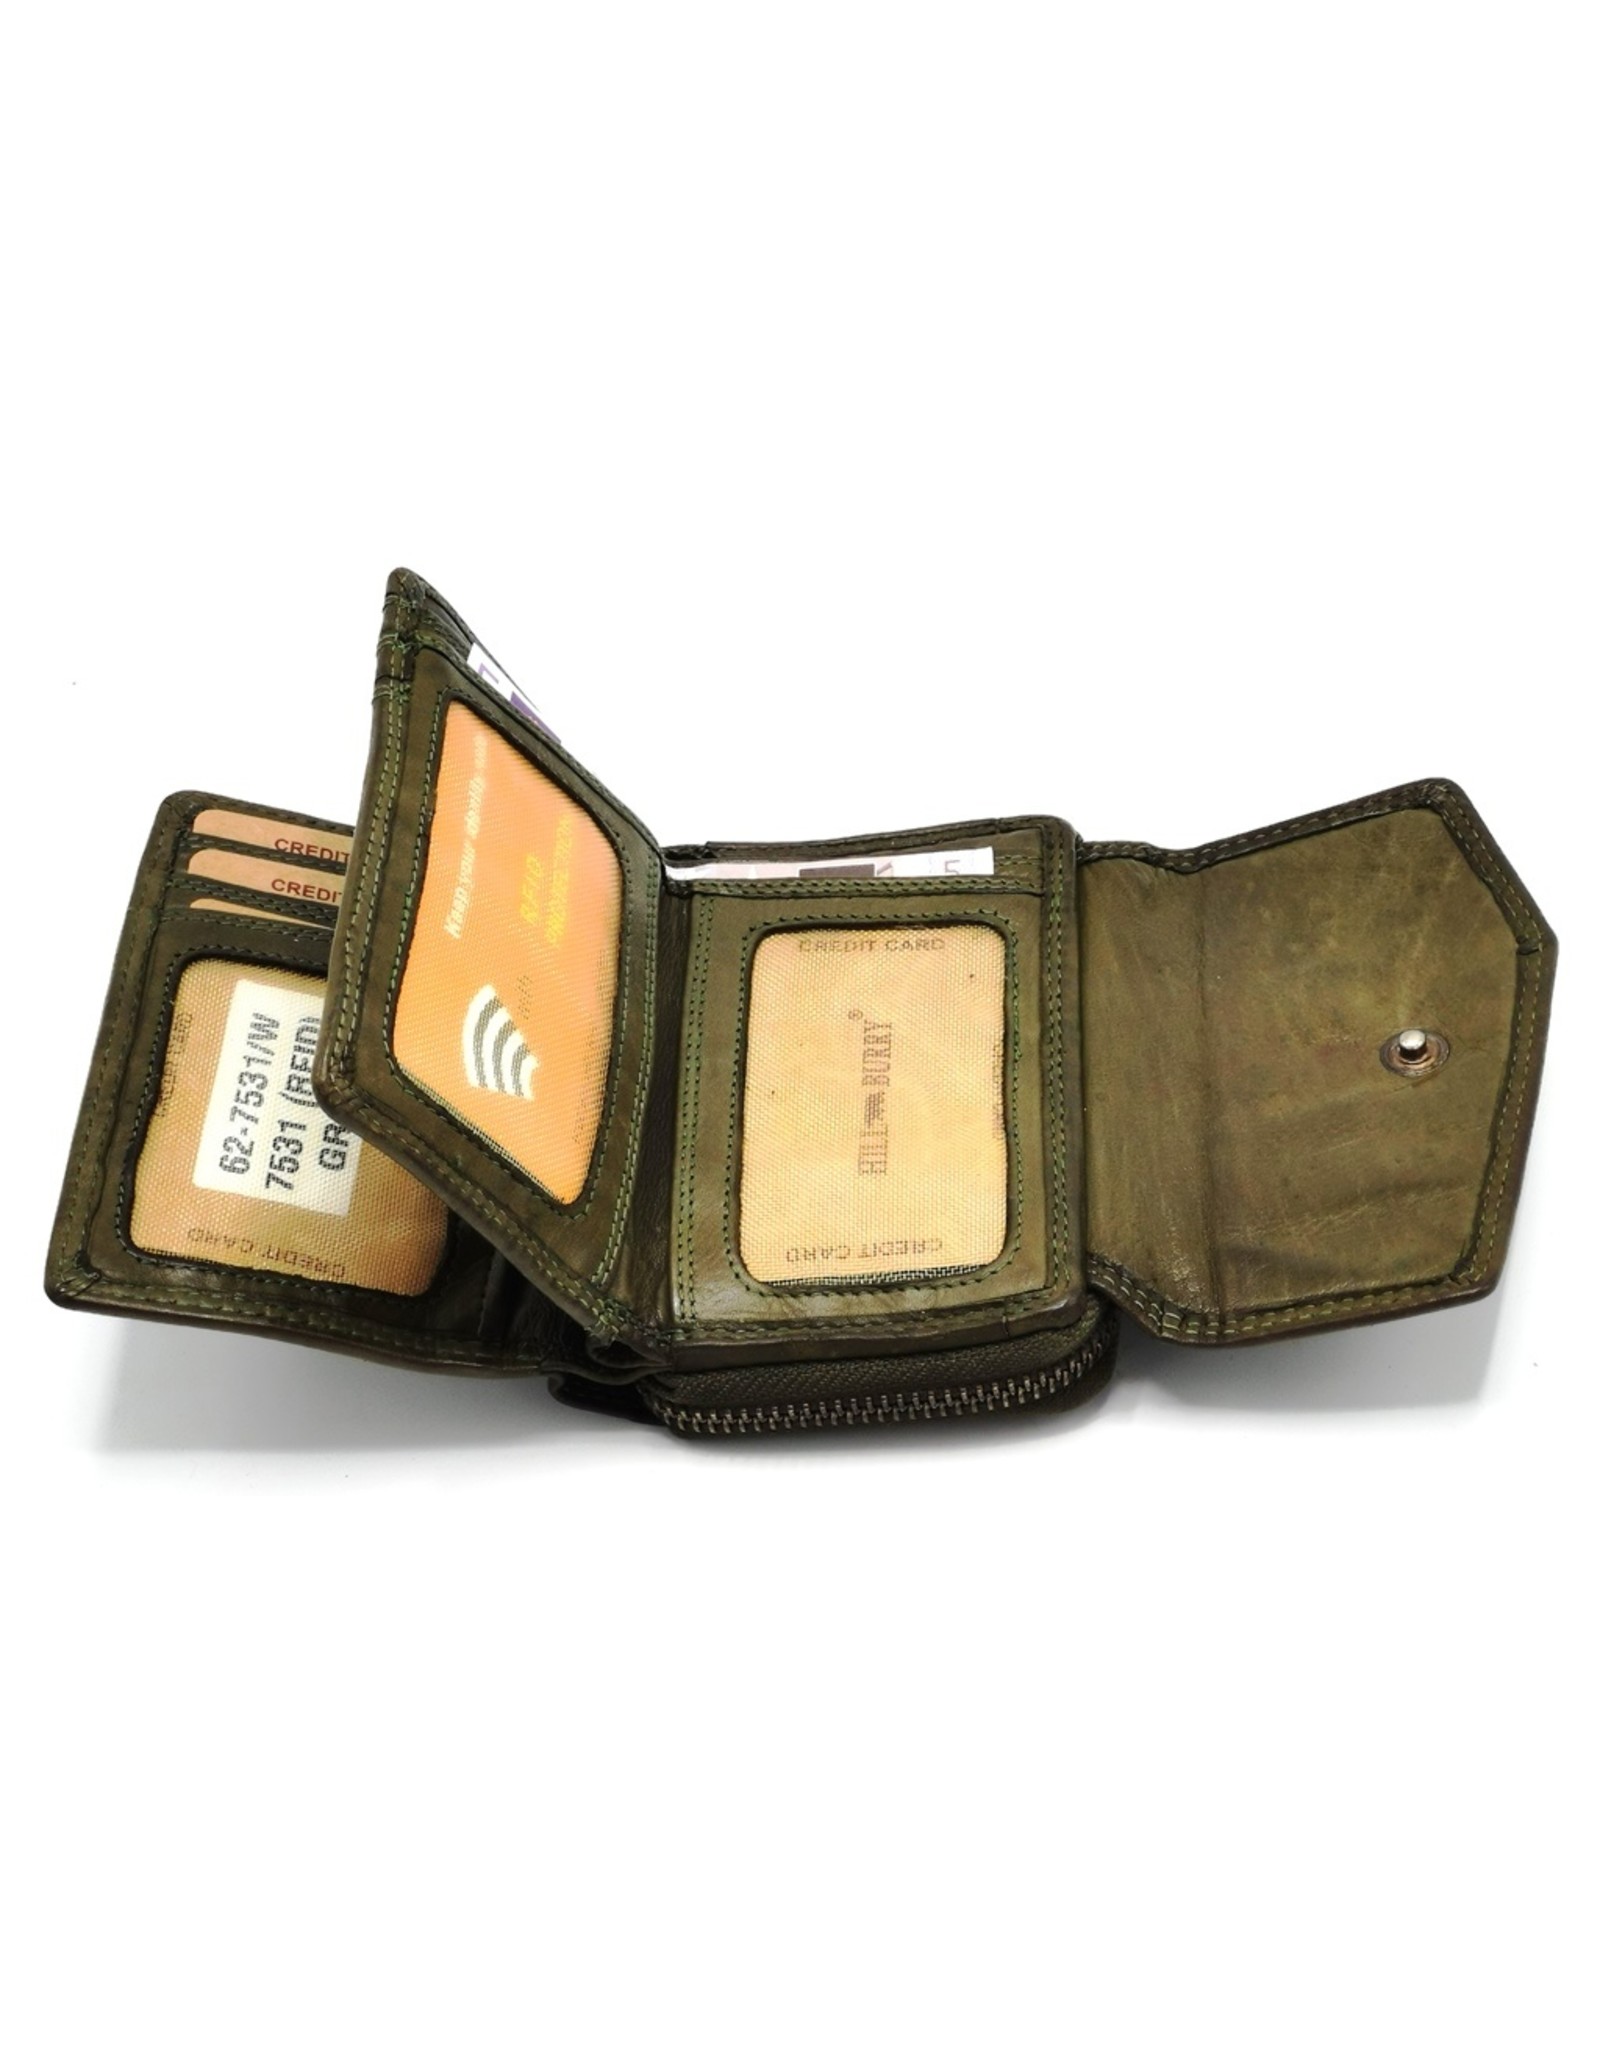 HillBurry Leather Wallets - Hillburry Wallet with Cover Washed Leather Green